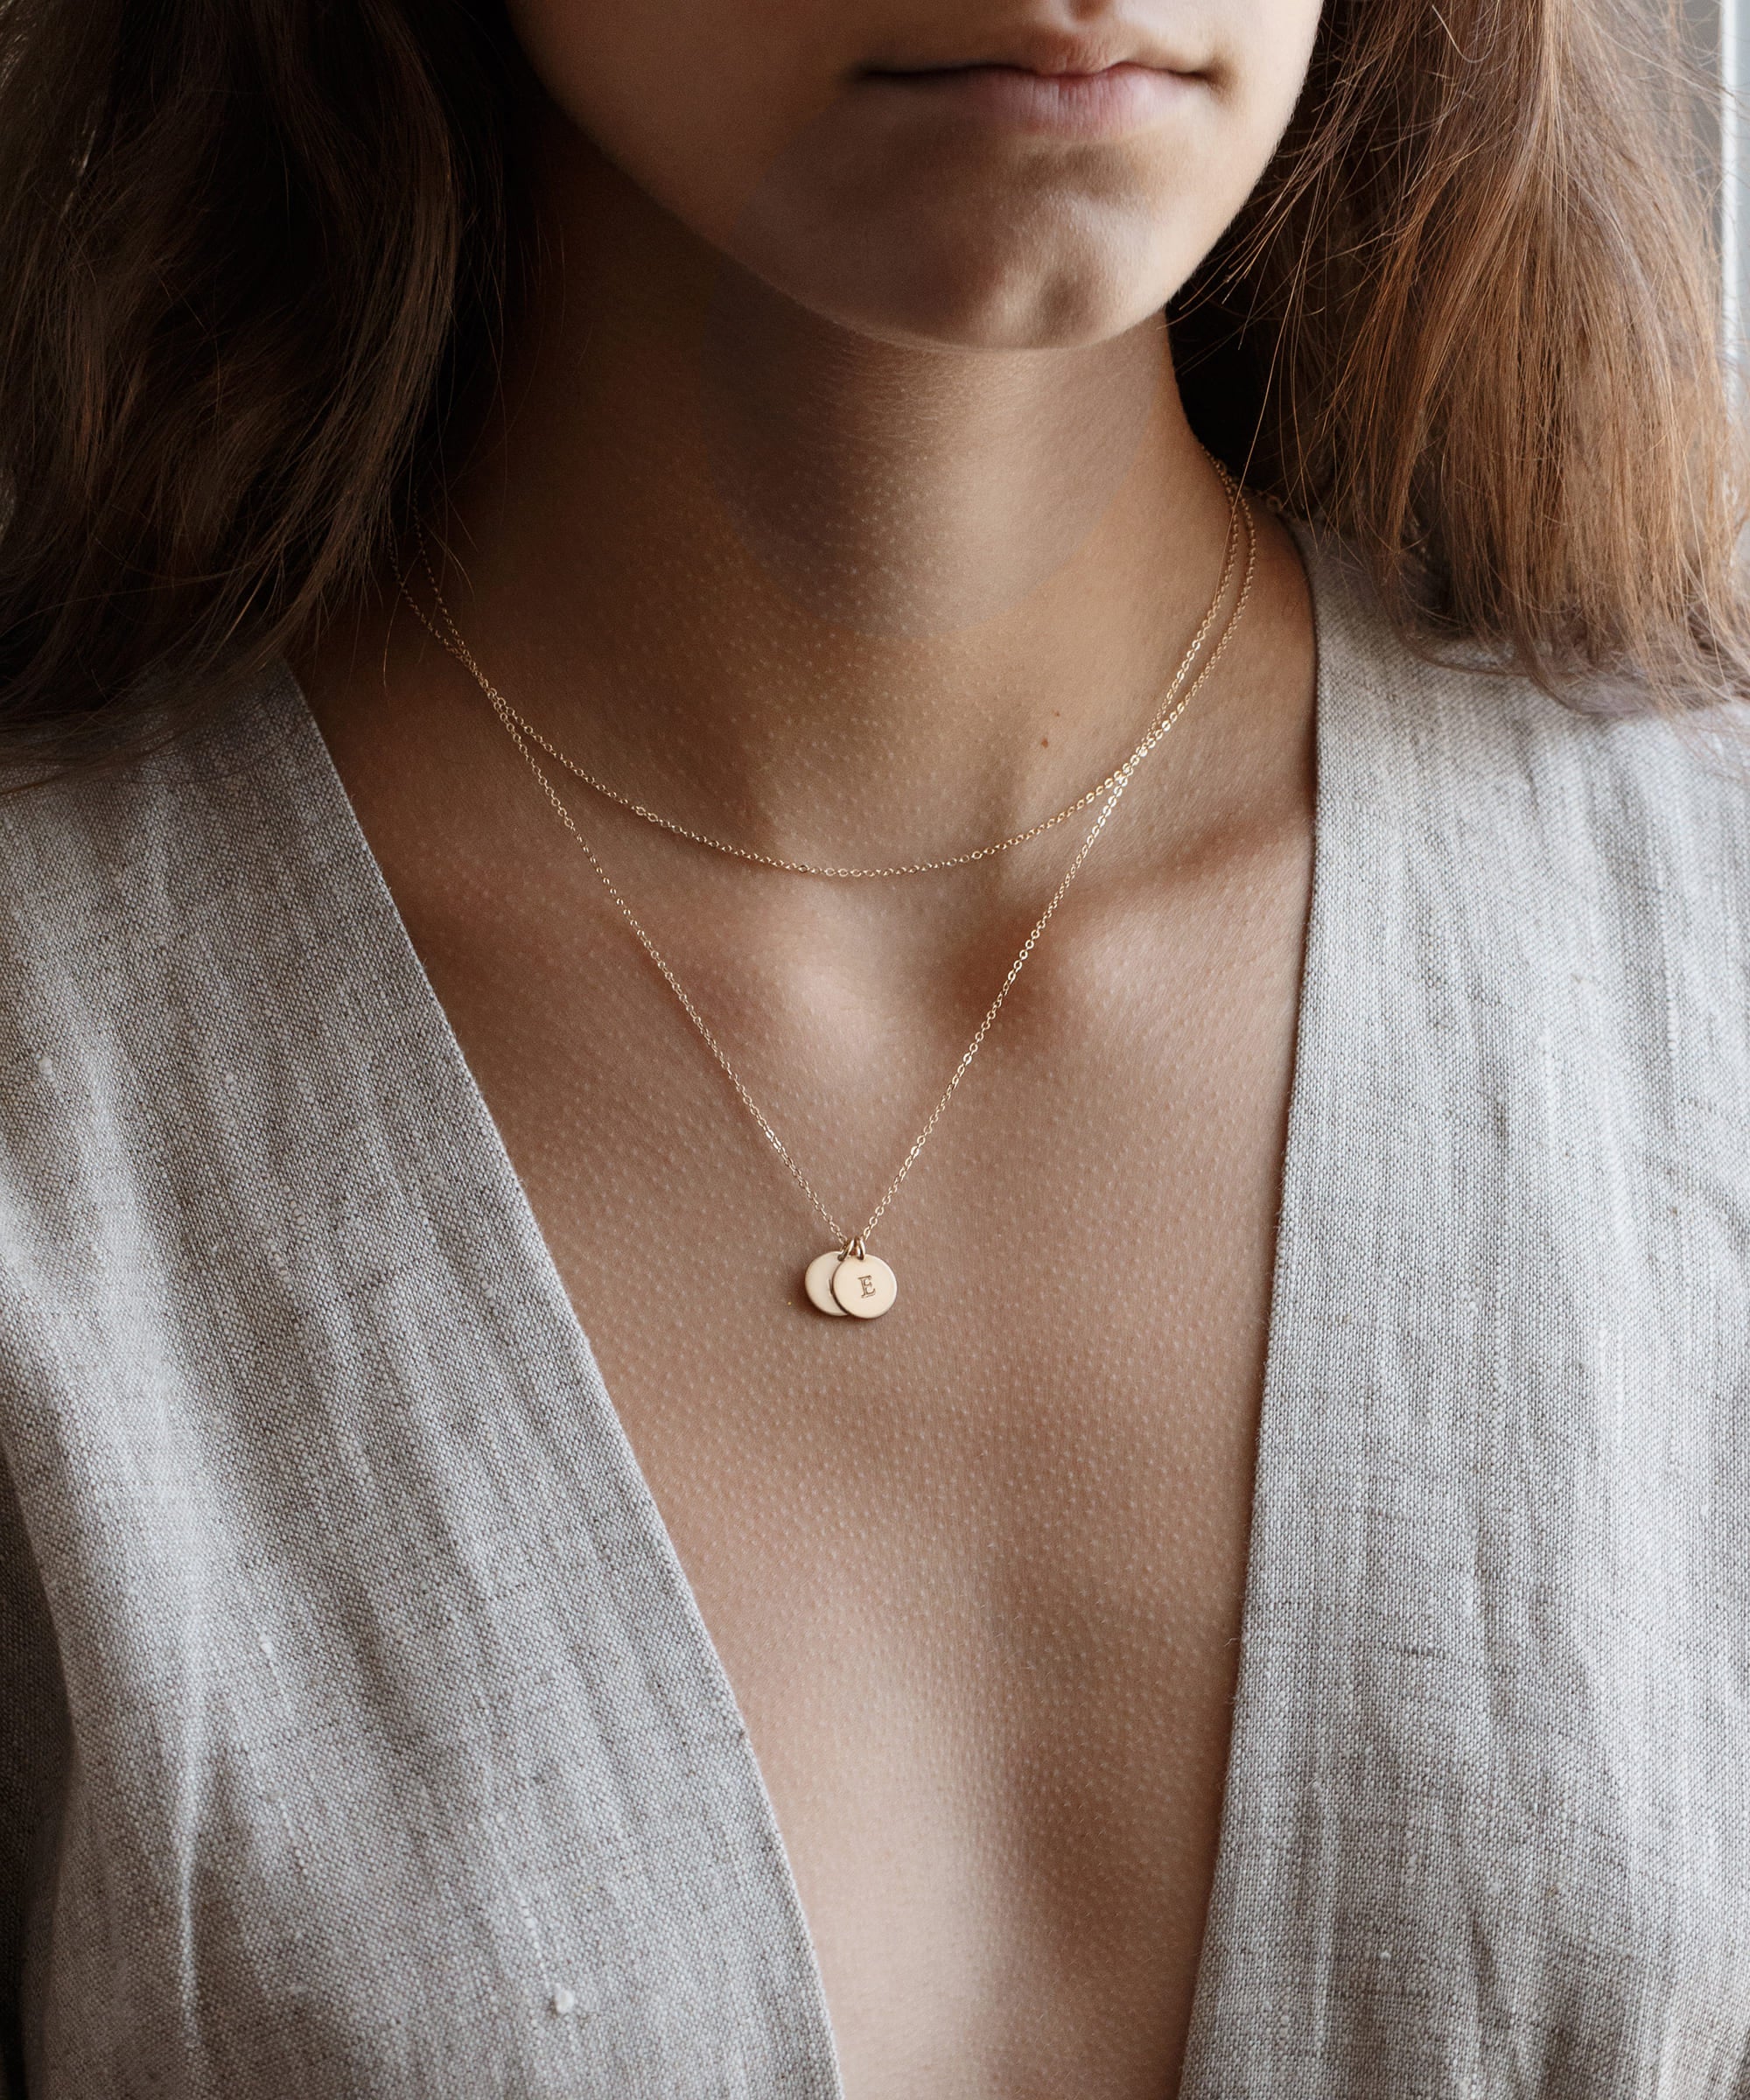 Buy Solid 10K Gold Box Chain Necklace, Delicate Dainty Layered Necklace,  Everyday Necklace, Simple Chain, Best Seller, Gift, Anniversary Online in  India - Etsy